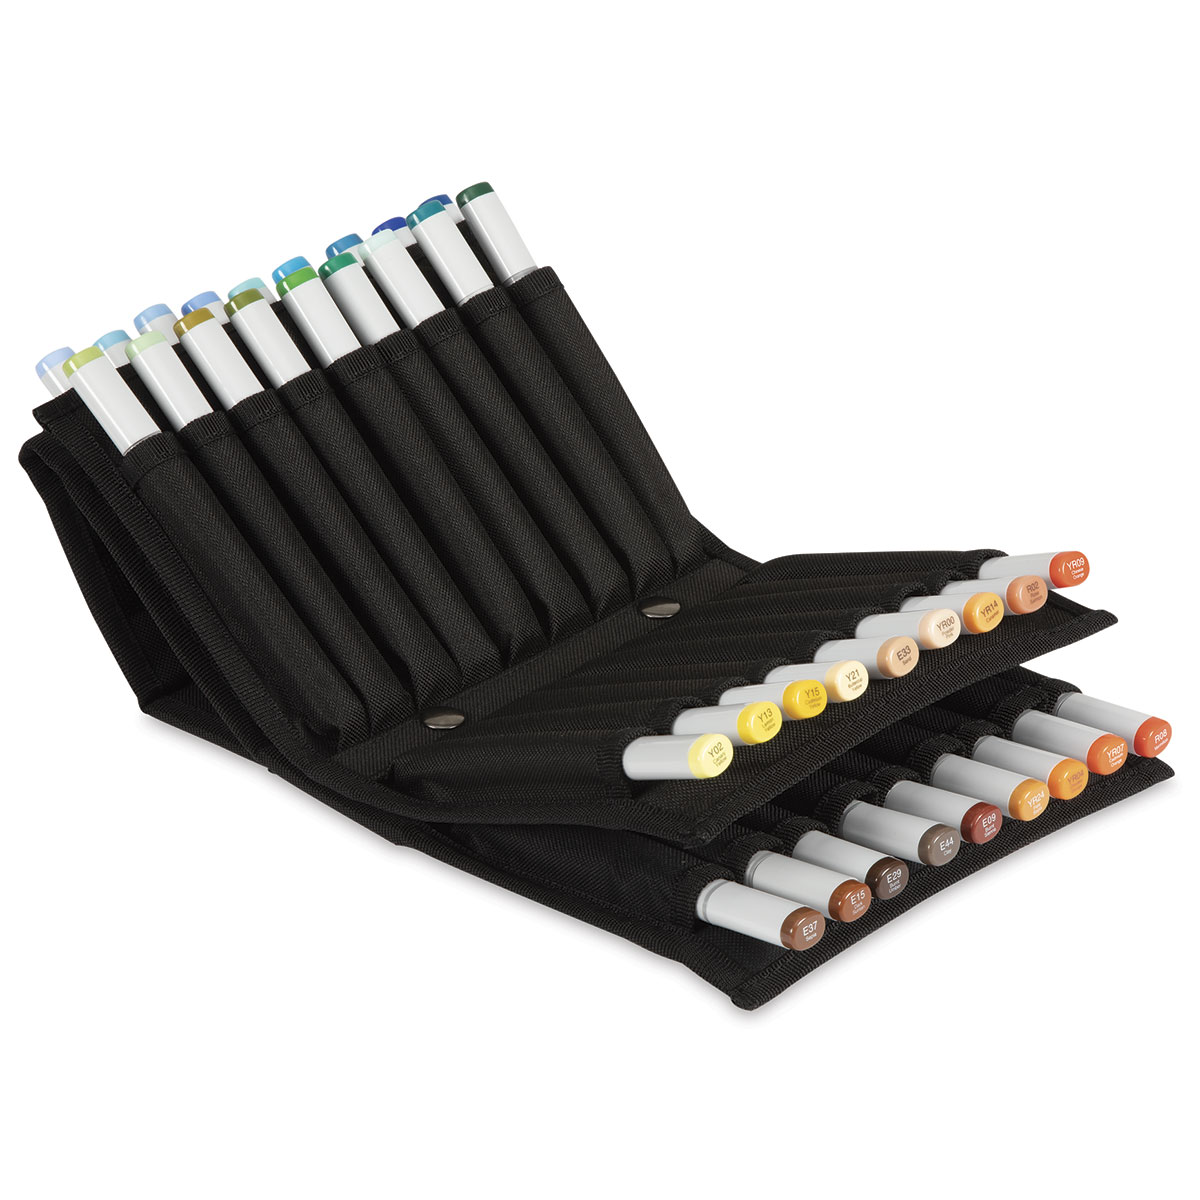 Copic Empty Marker Wallet - Holds 24 Markers